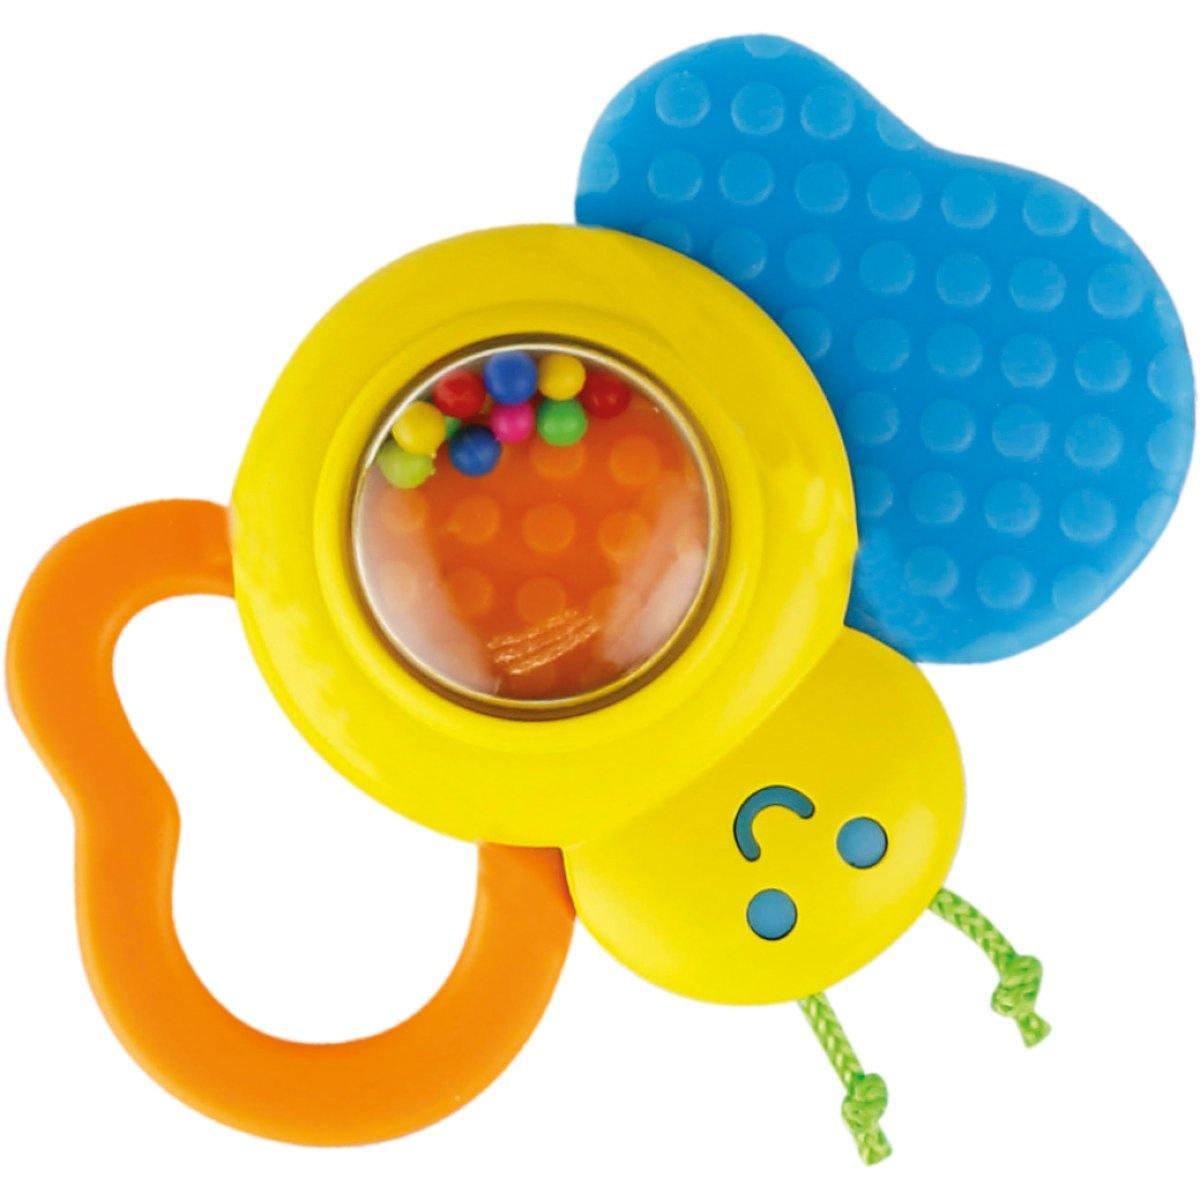 WinFun Baby’s Butterfly Rattles - BumbleToys - 0-24 Months, Cecil, Rattles, Unisex